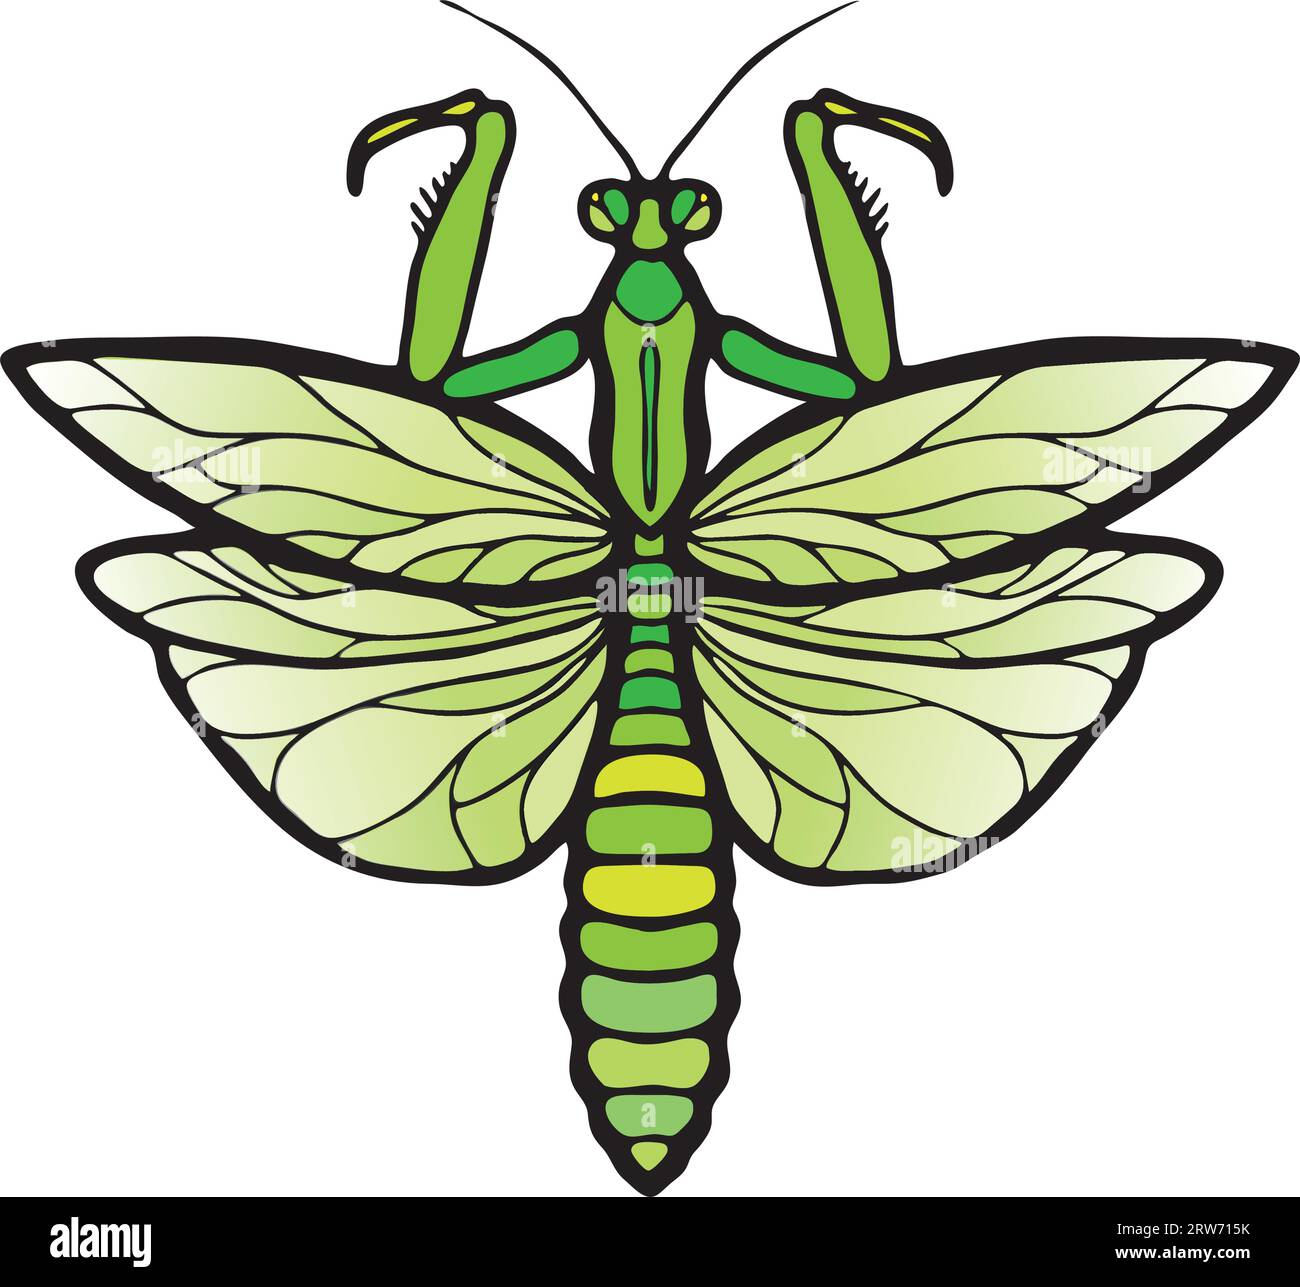 Intricate, symmetrical stylized mantis in shades of green draws inspiration from Art Nouveau and Gothic stained glass. Stock Vector